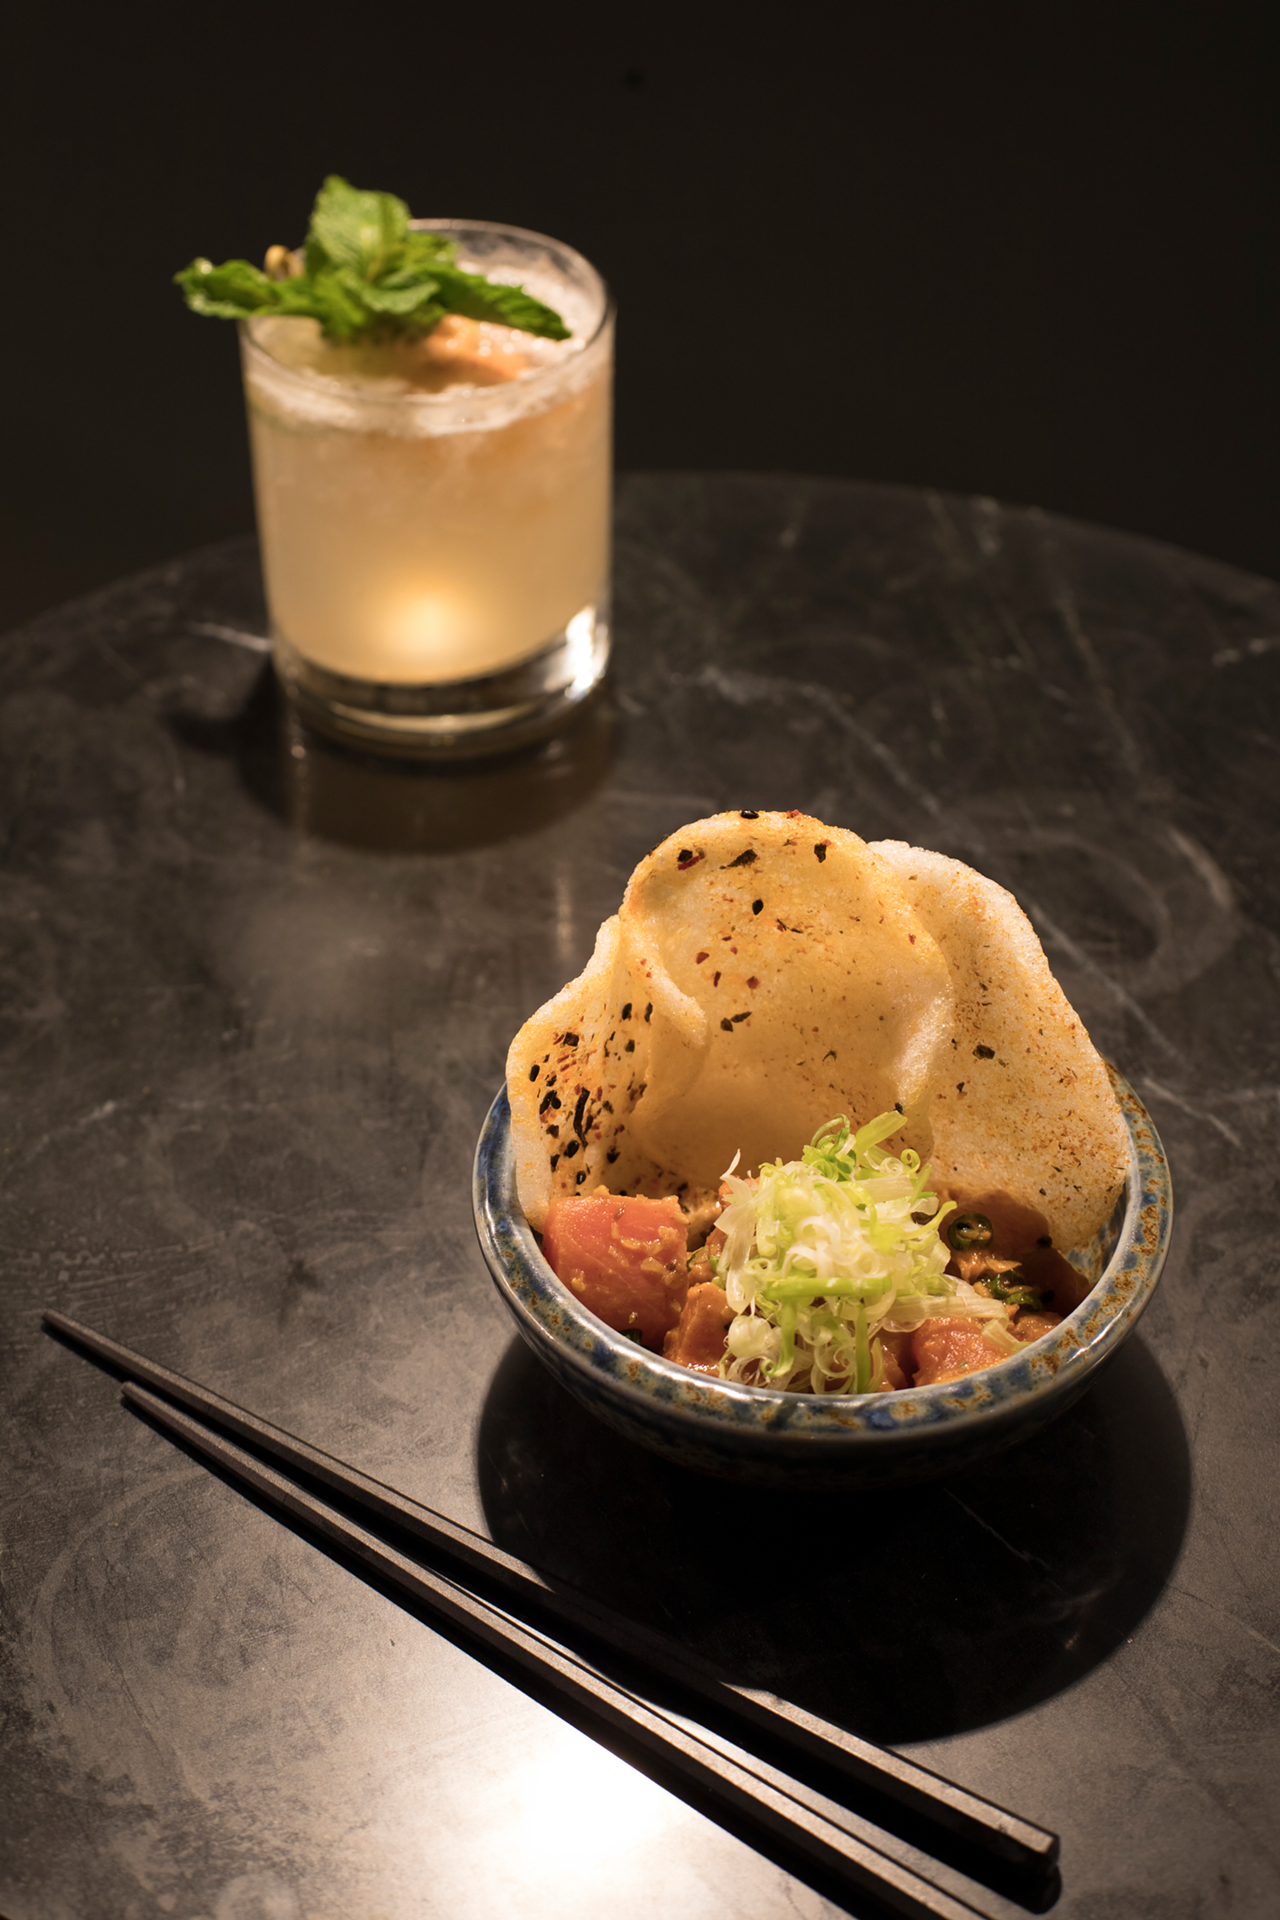 Pictured with another cocktail, Genji Glove, the fresh tuna poke arrives with big, complementary shrimp chips.